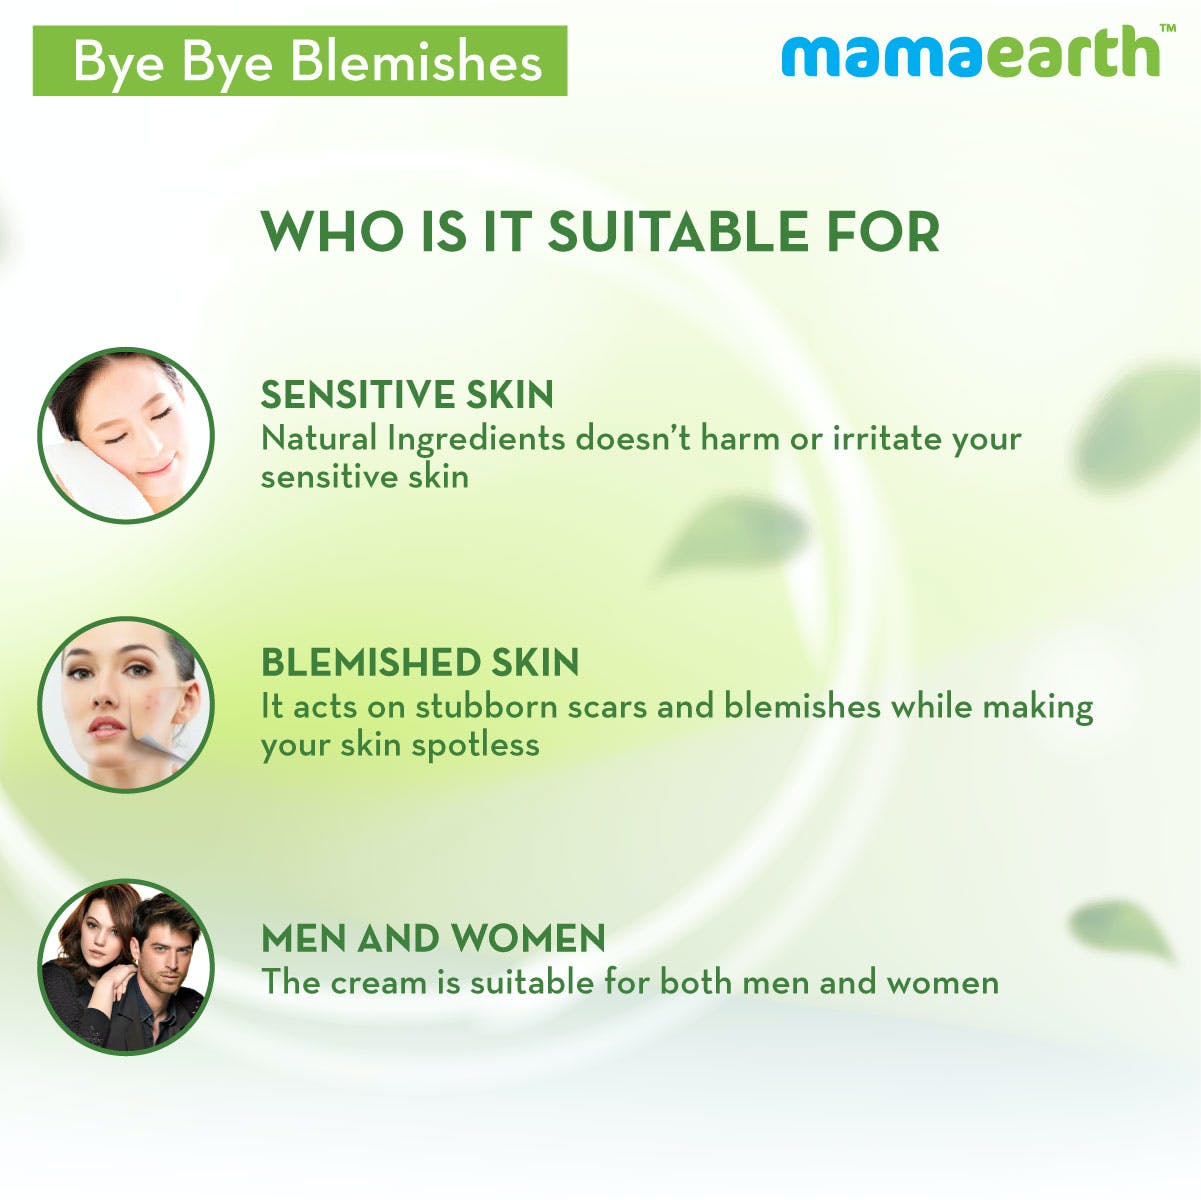 MamaEarth Bye Bye Blemishes Face Cream (30 g) MamaEarth